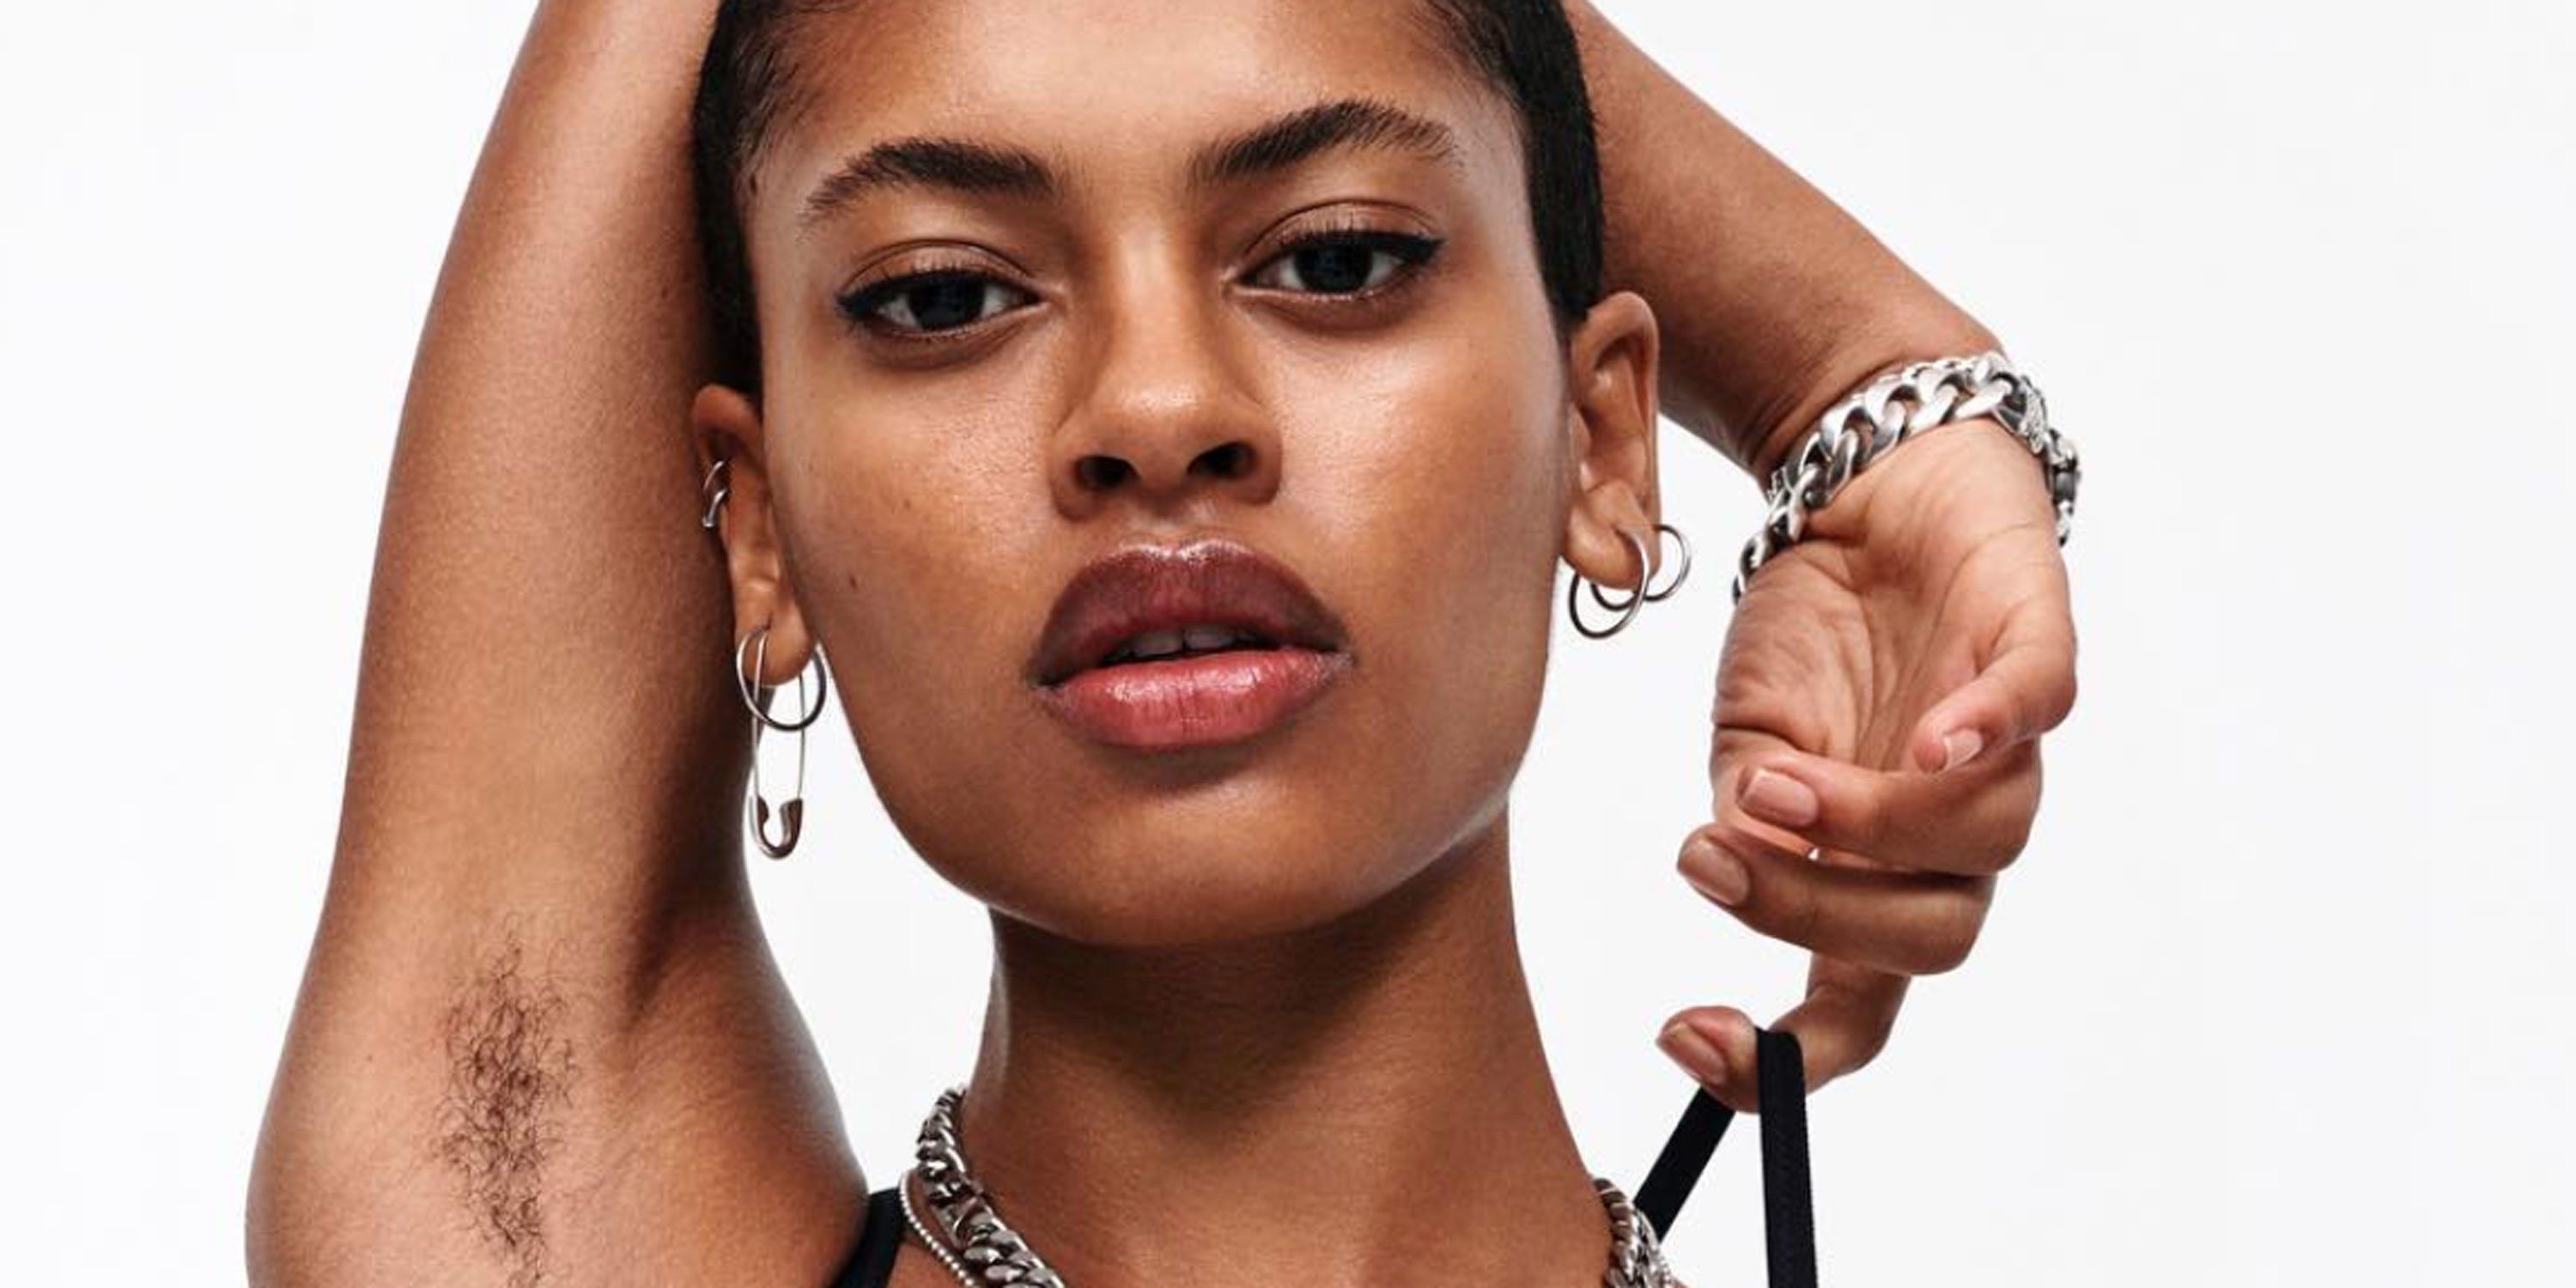 Nike Ad Featuring Woman With Underarm Hair Gets Called Disgusting